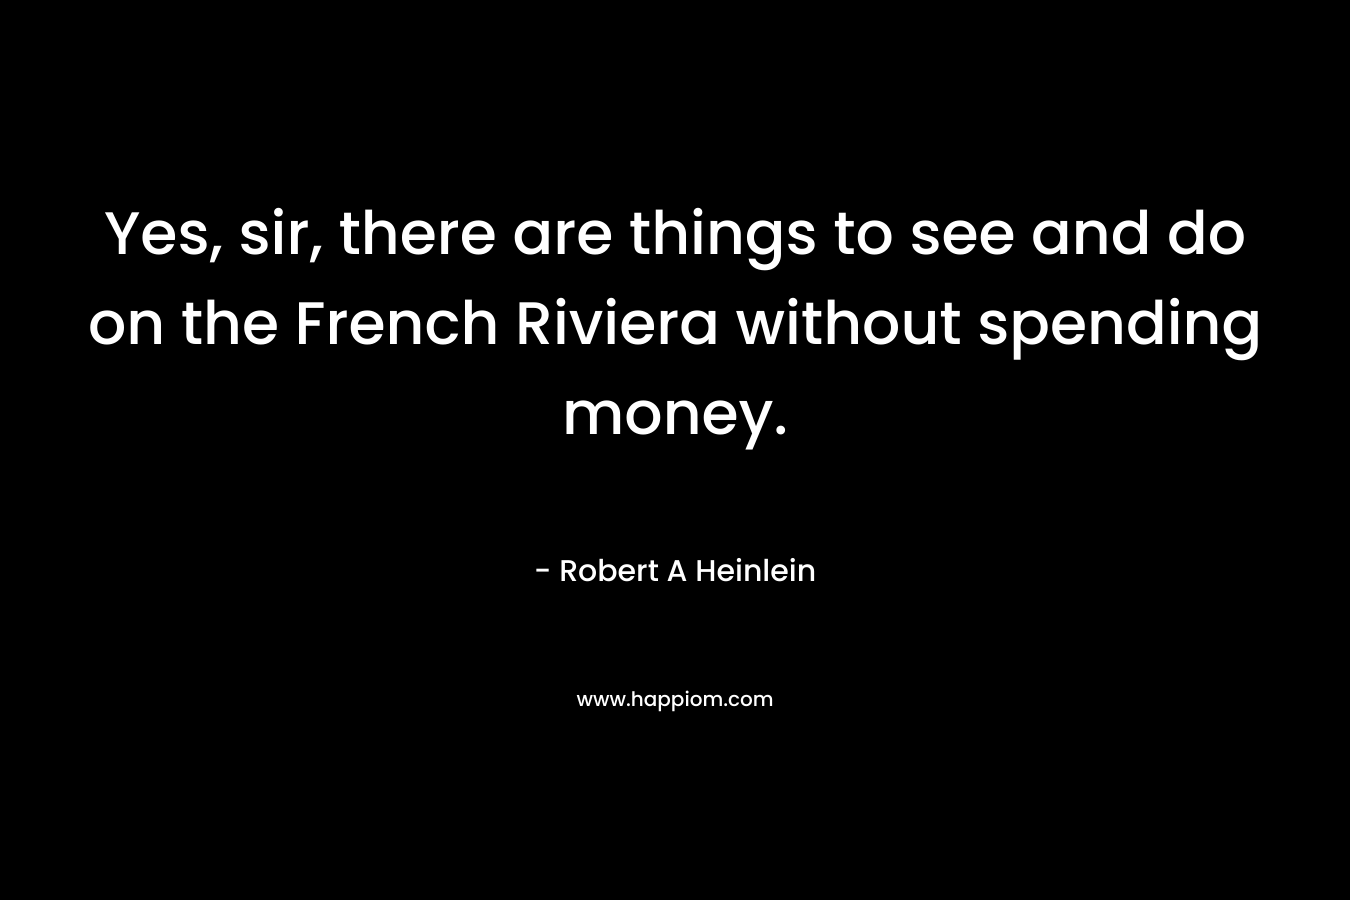 Yes, sir, there are things to see and do on the French Riviera without spending money.